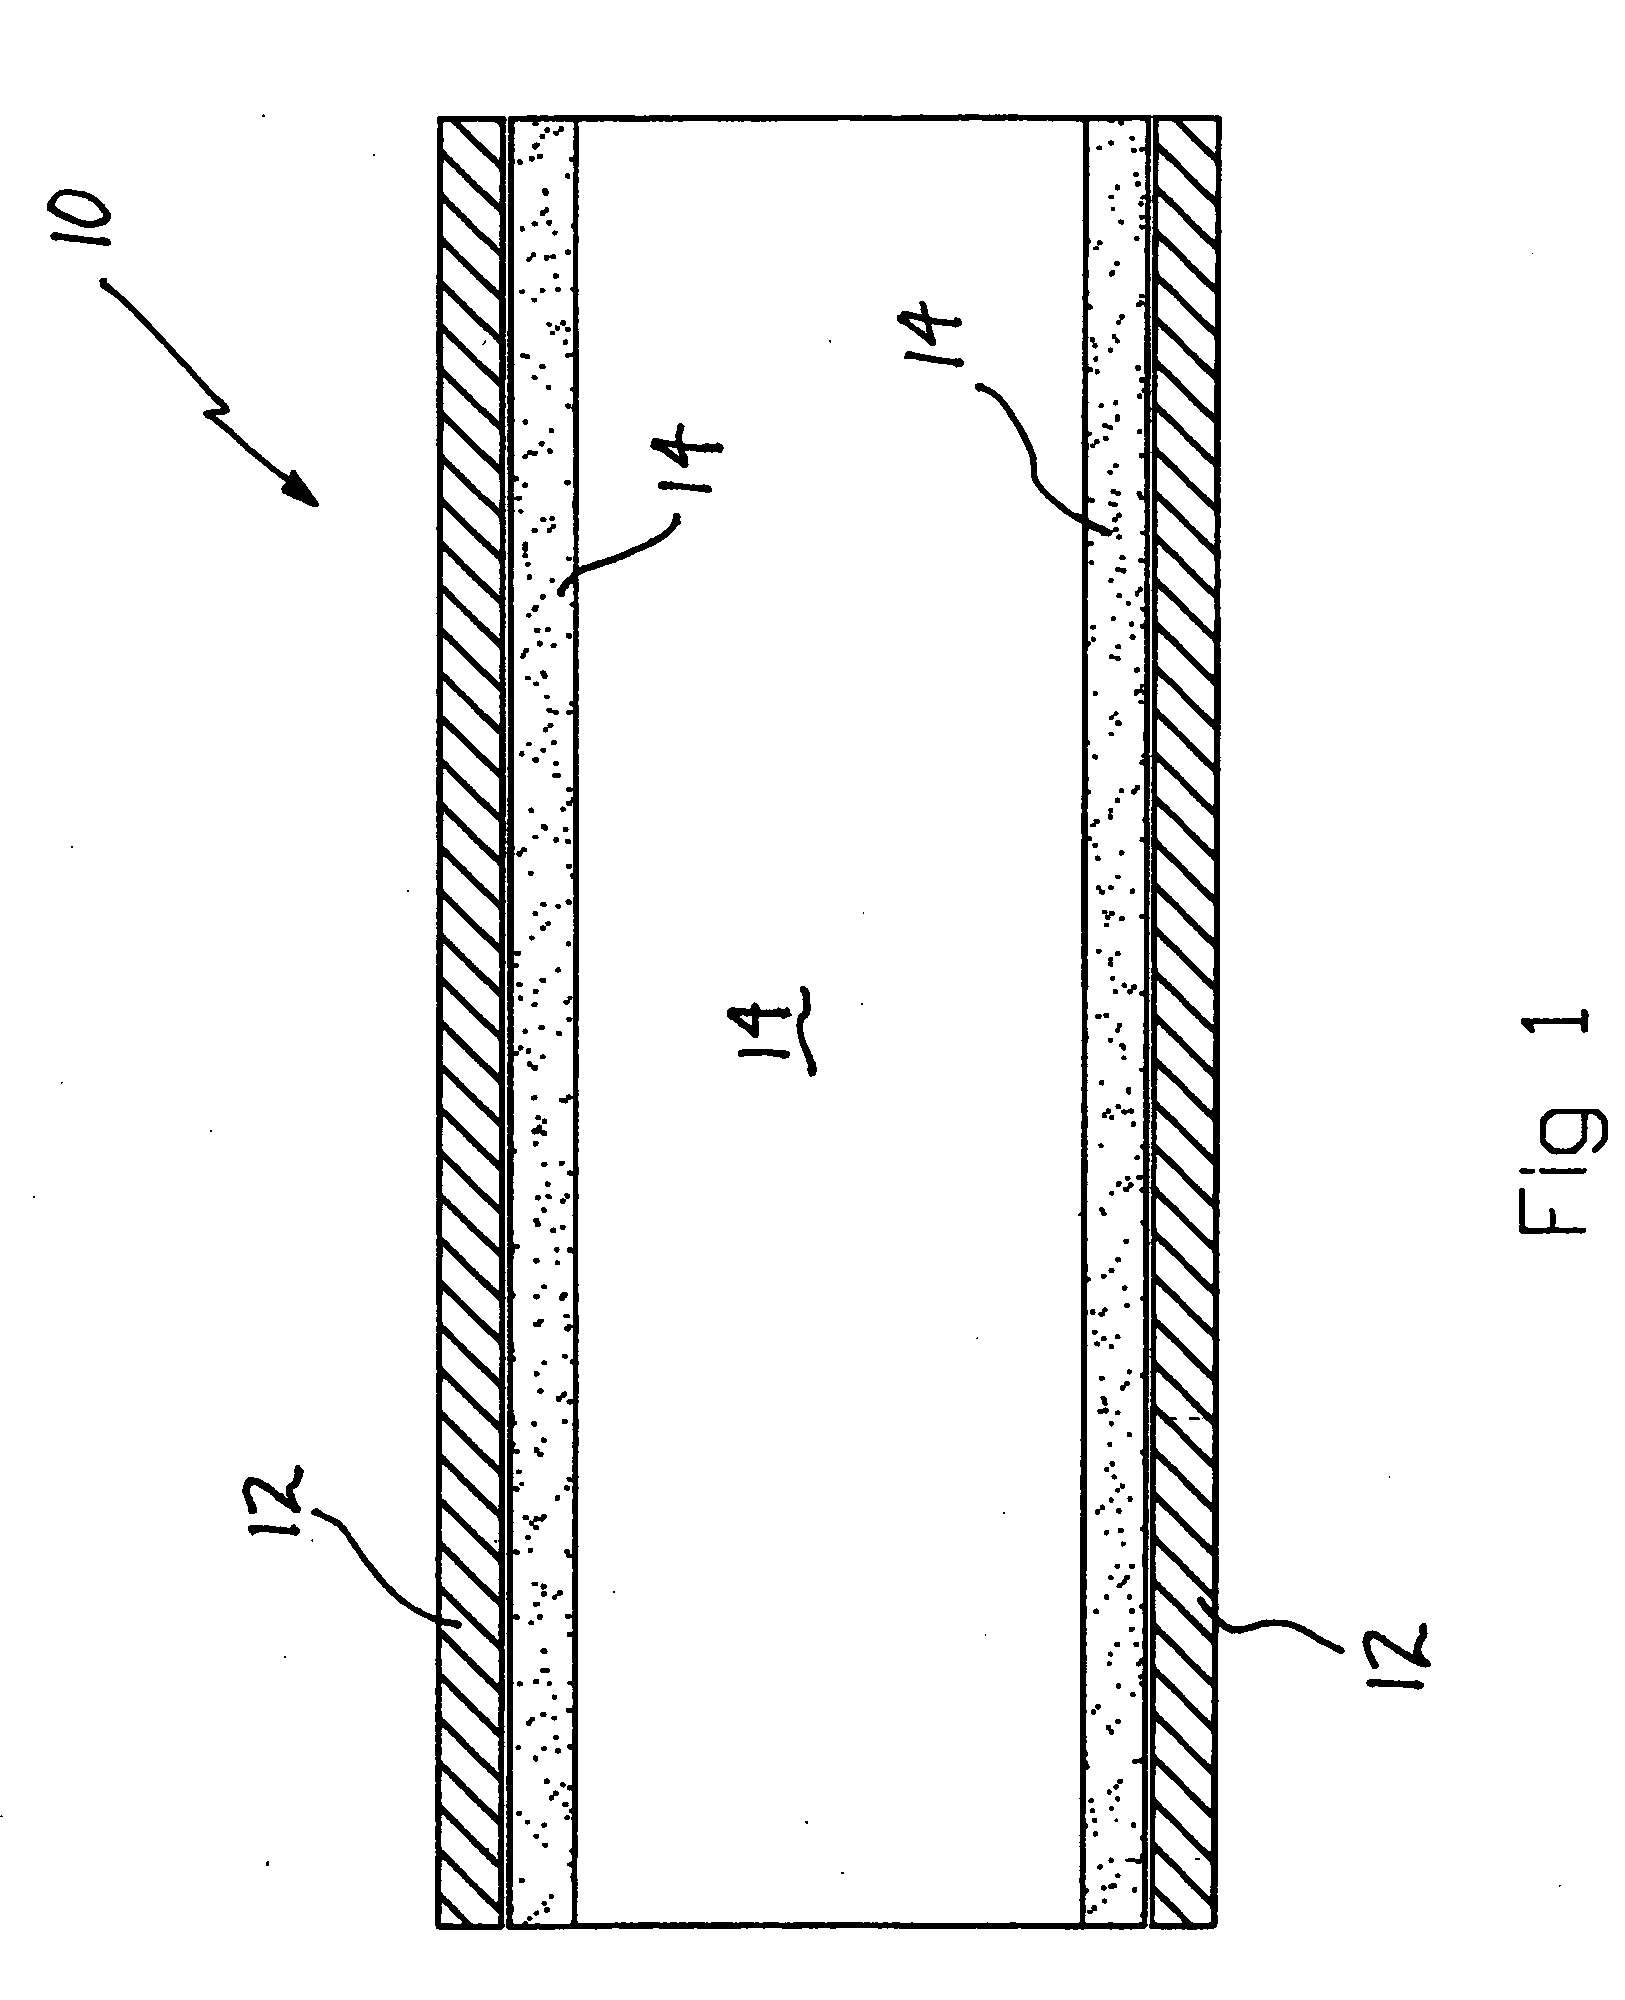 Systems and methods for overcoming or preventing vascular flow restrictions